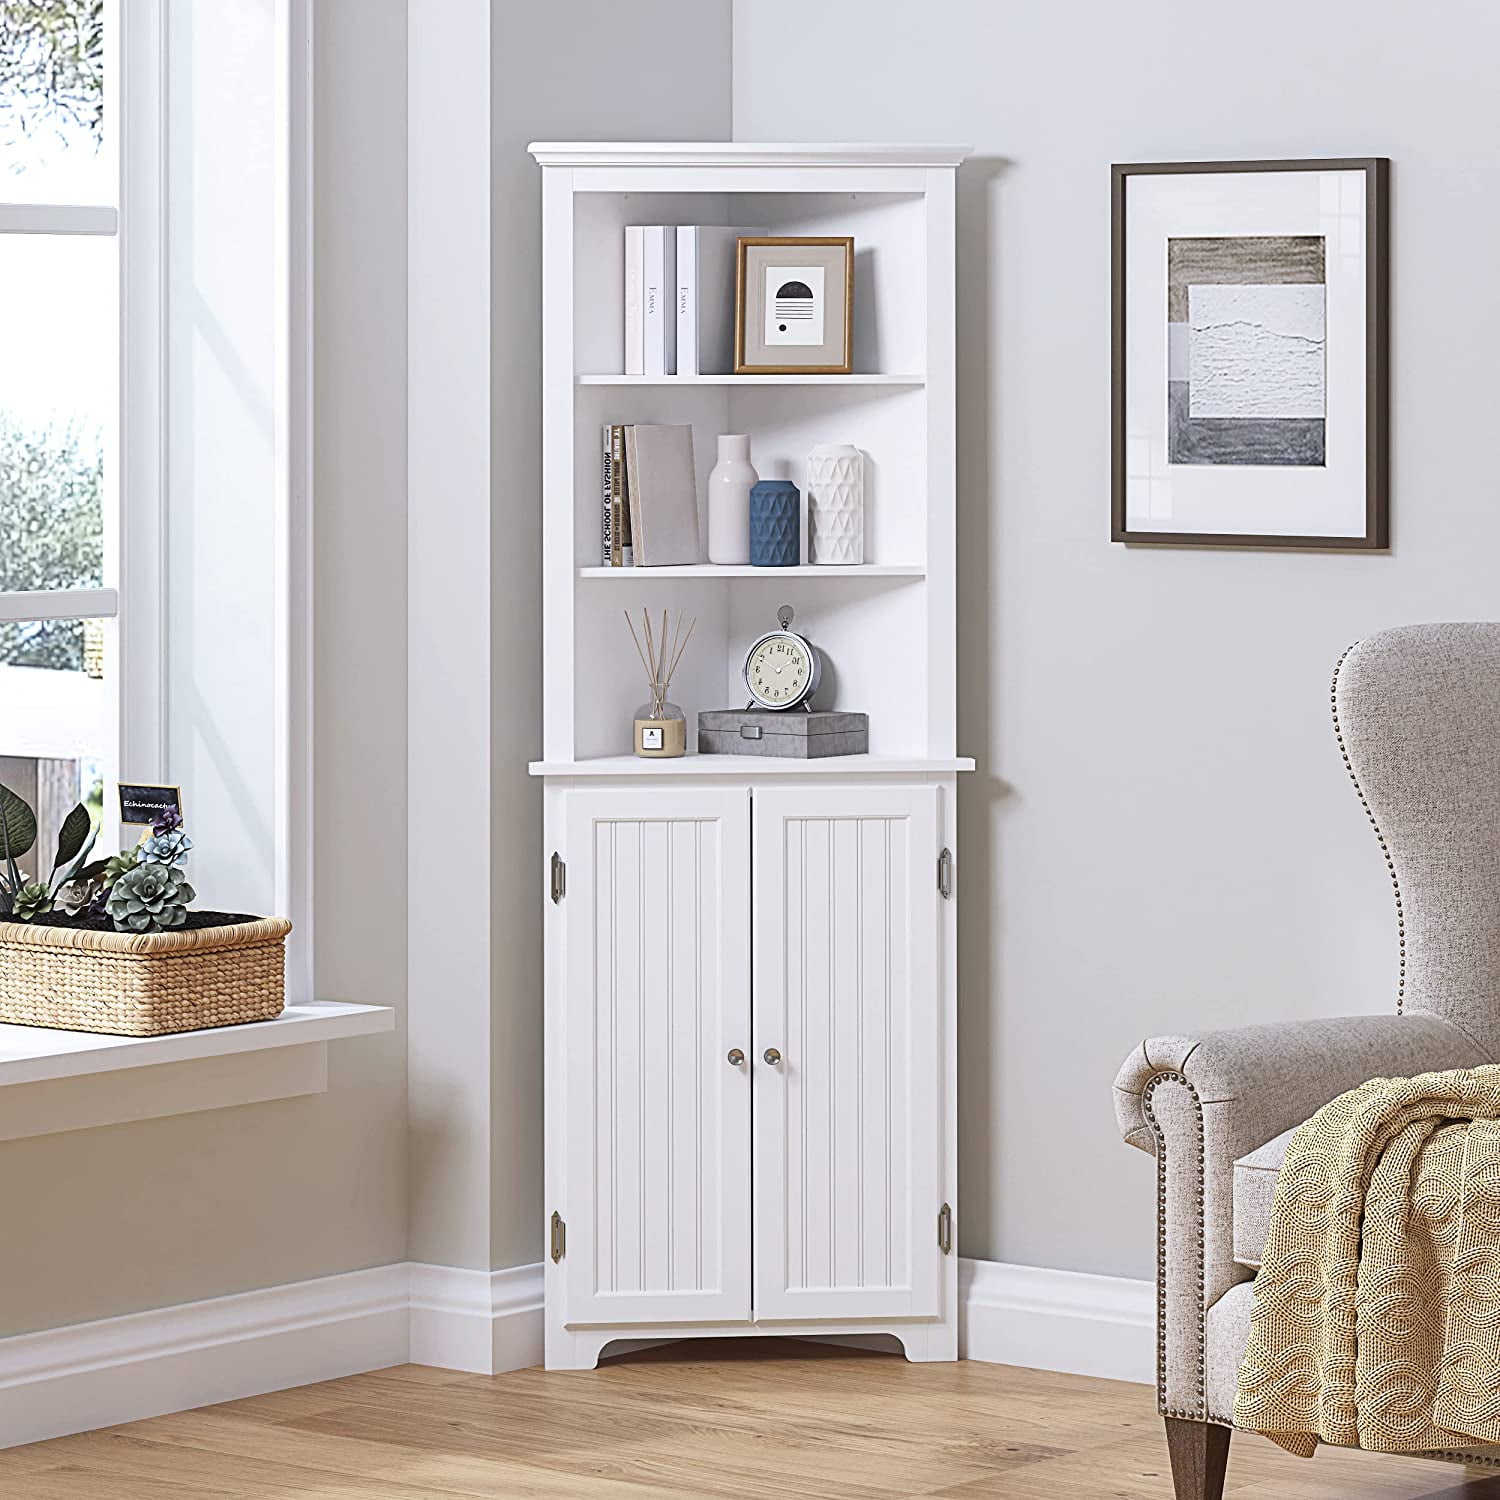 Utex Tall Corner Cabinet Free Standing Storage With Doors And Adjule Shelves 23 W White Com